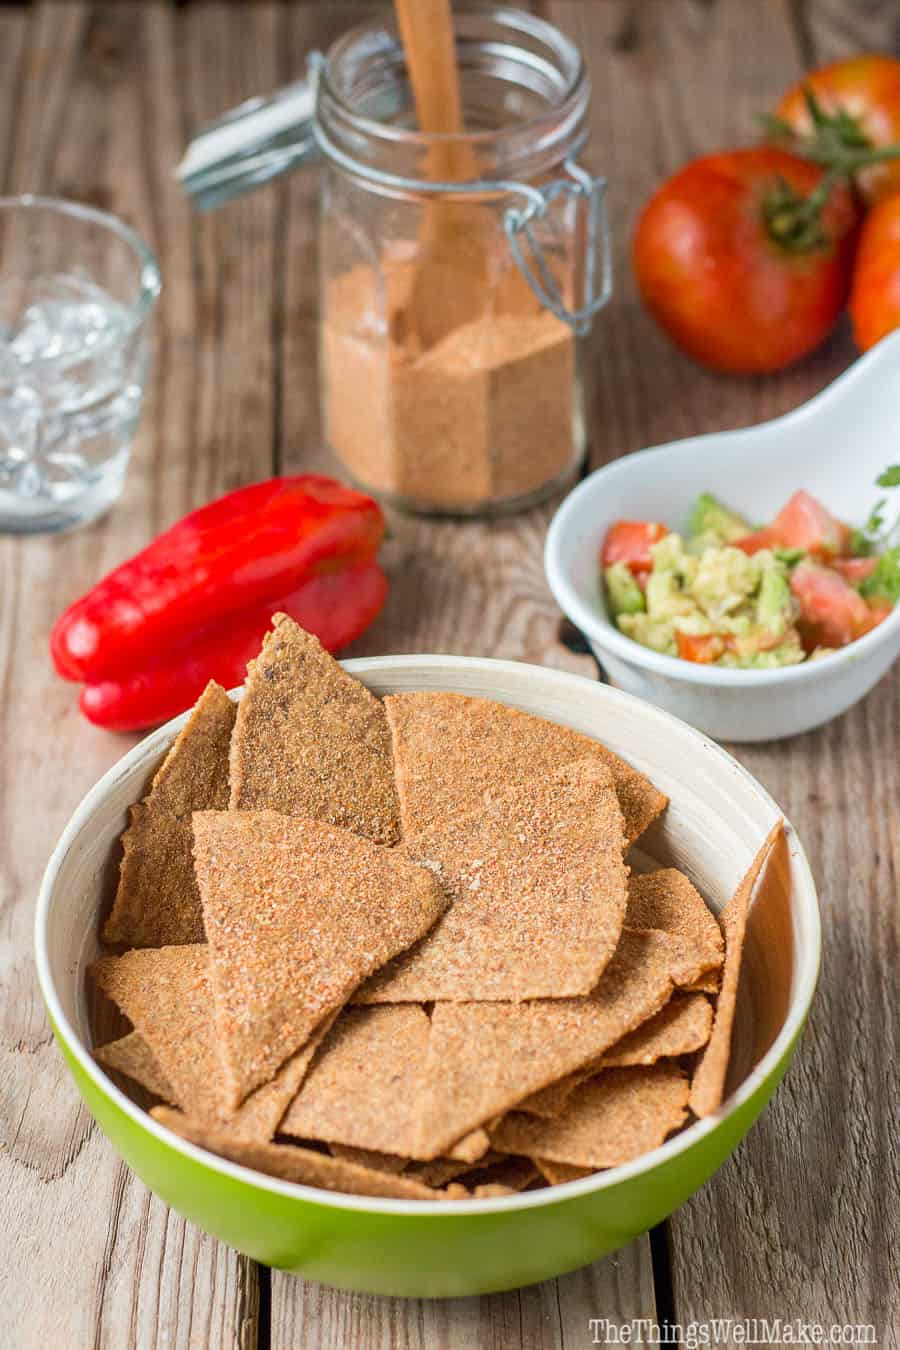 Crispy and coated with a tasty Mexican spice blend, these paleo Doritos like chips are a satisfying, healthy way to curb your junk food cravings.